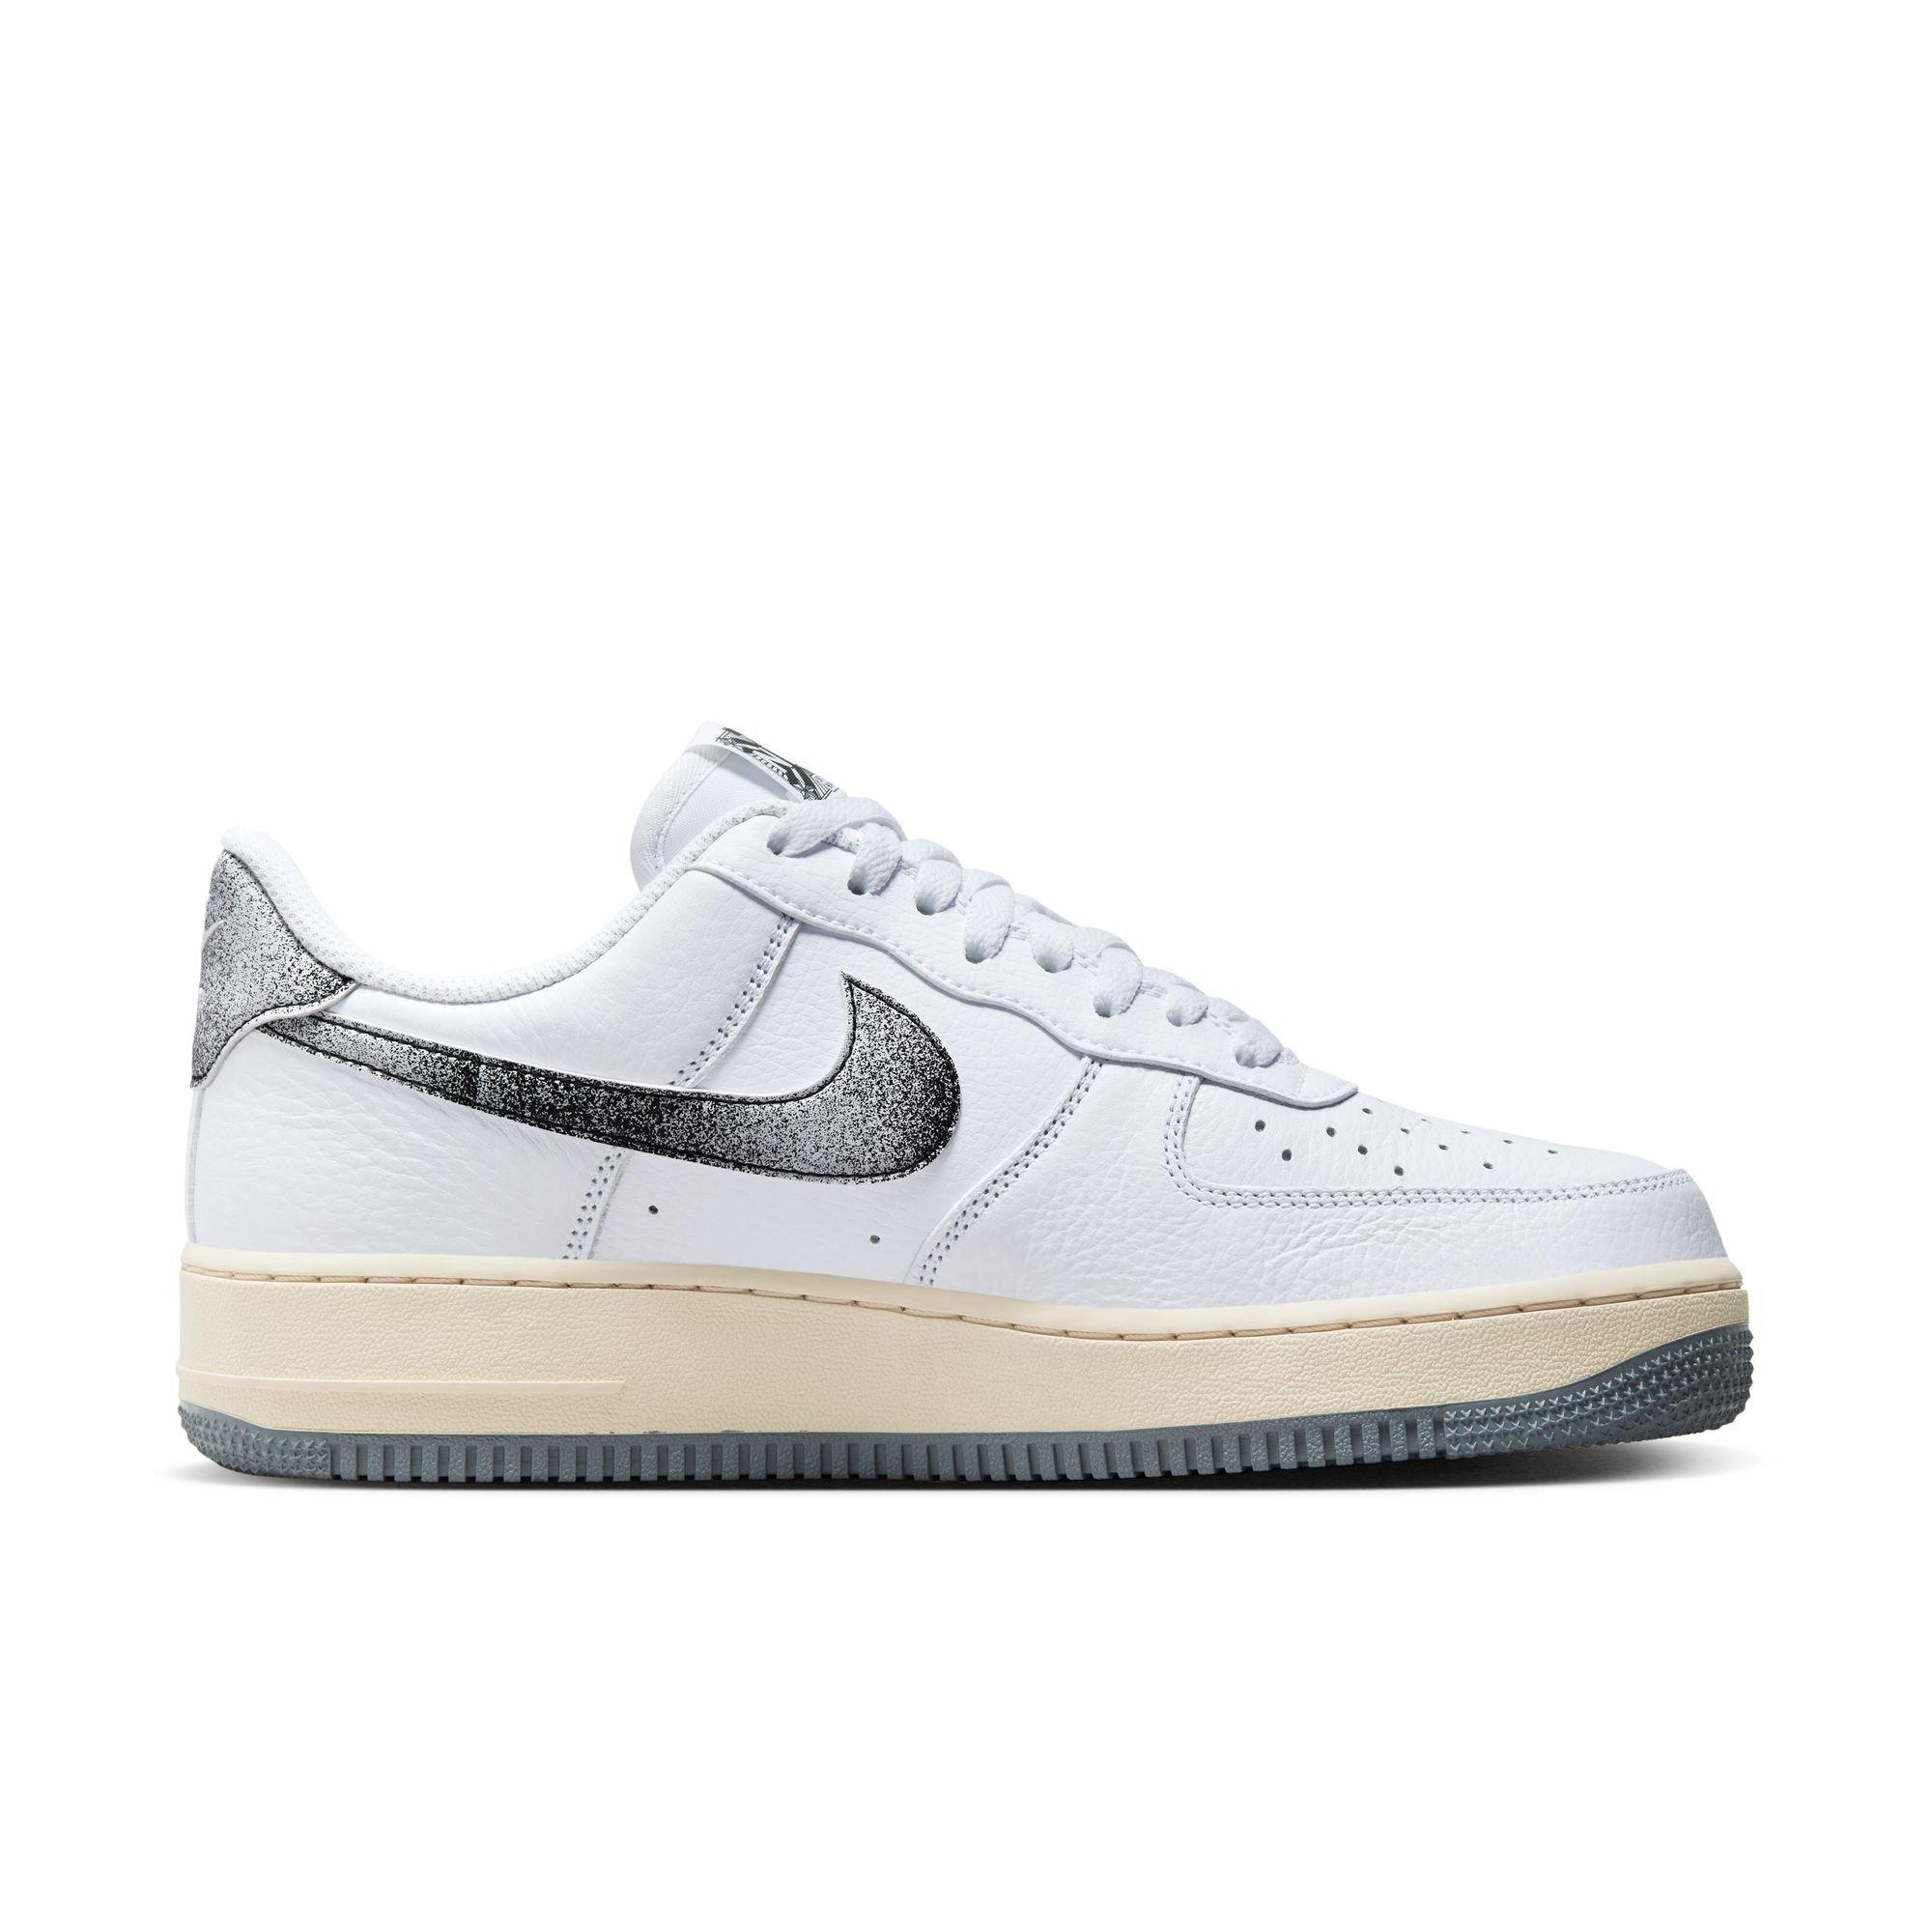 Nike Air Force 1 Low Collection Royale (LeBron) for Men